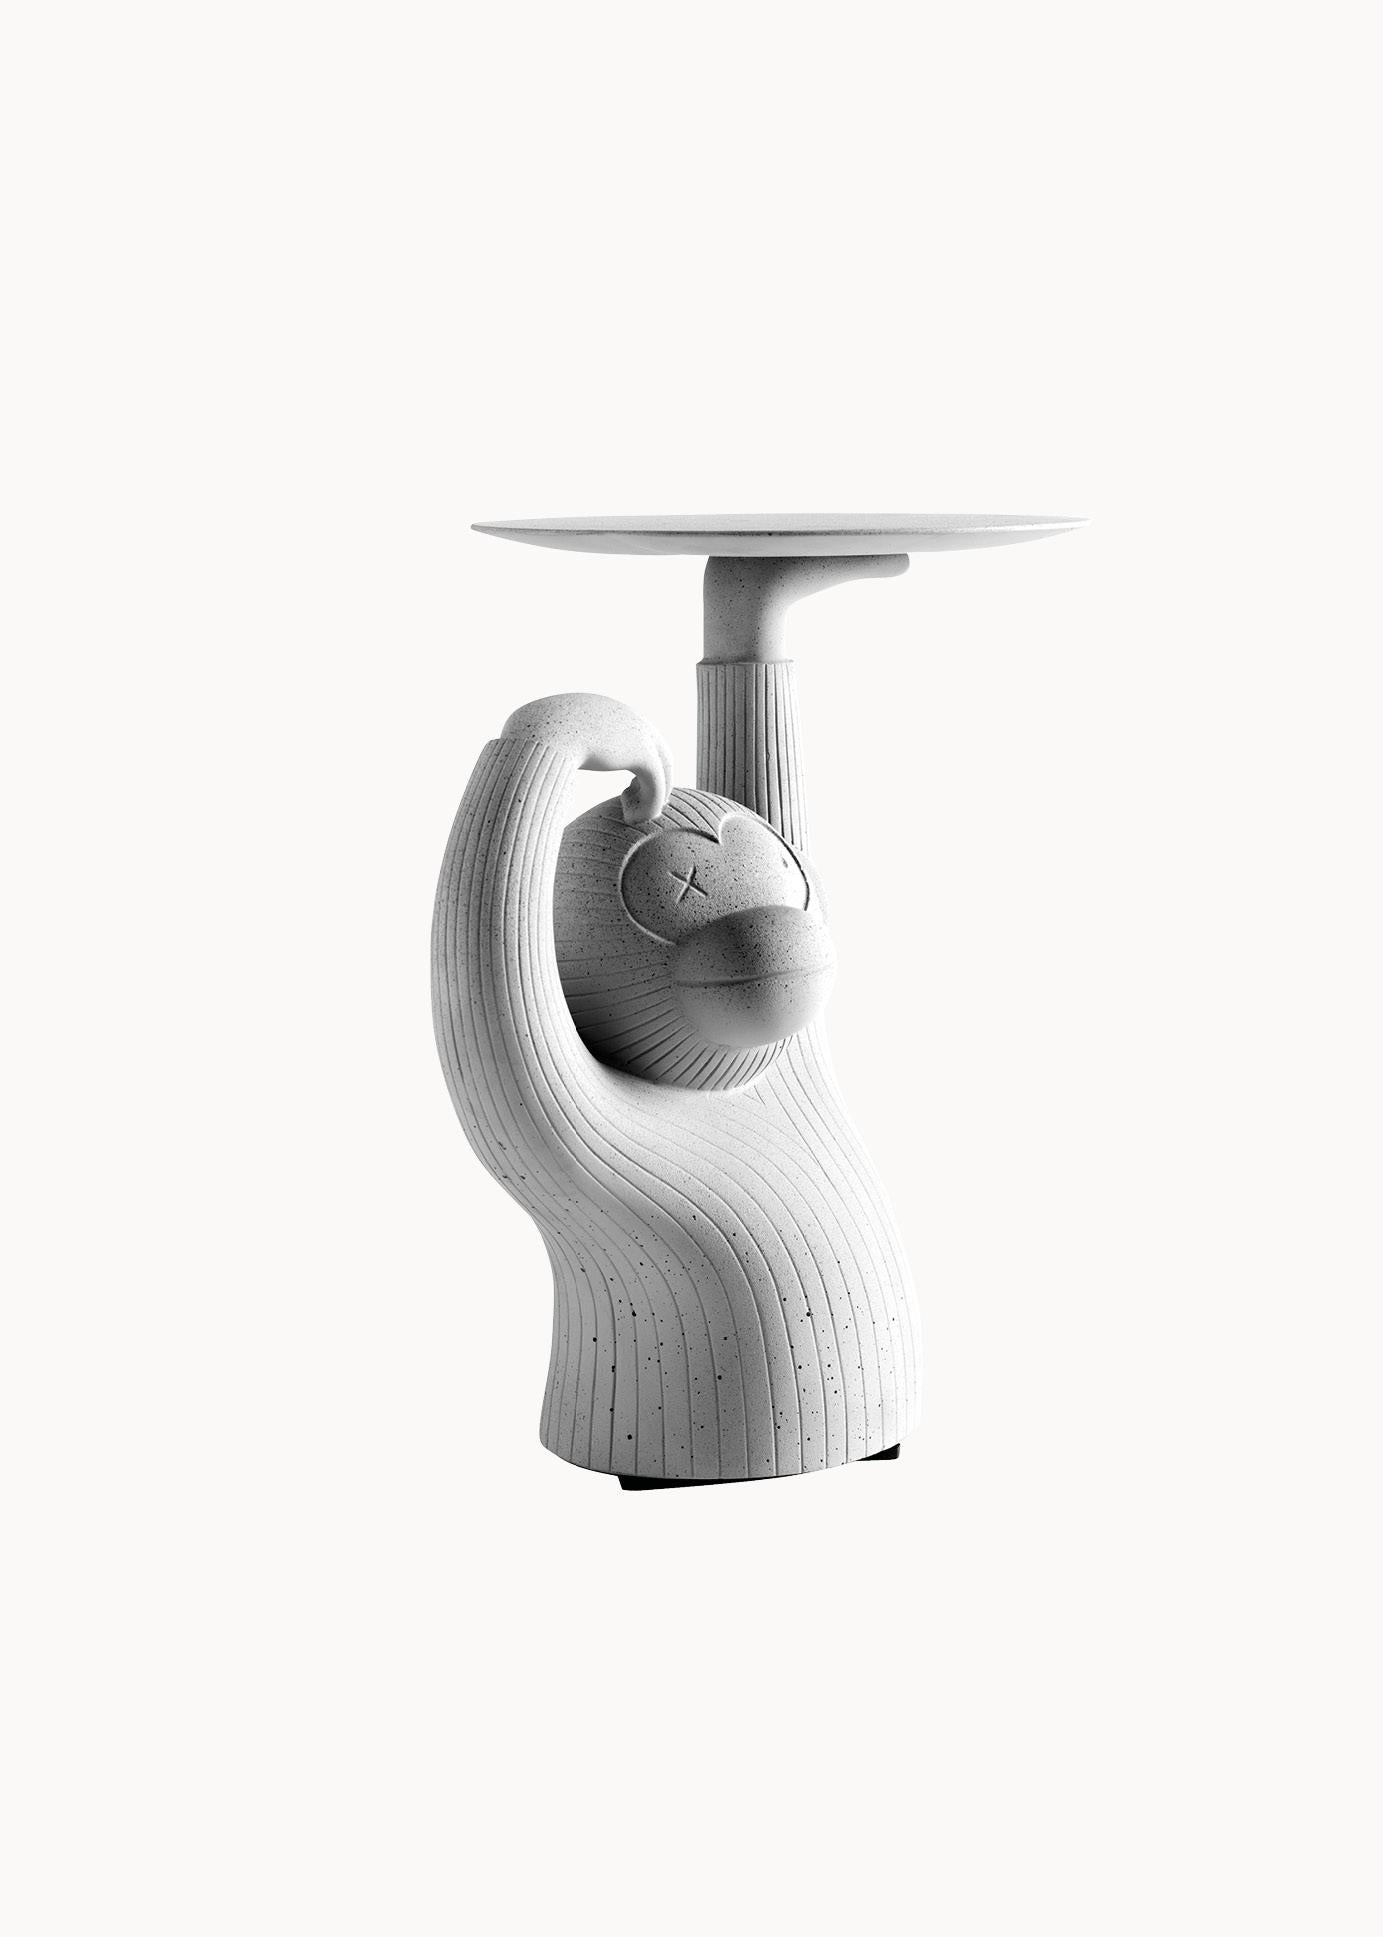 Side Table Monkey by Jaime Hayon 2015
Dimensions 
60 x 59 x h.40 cm
23,6 x 23,2 x 15,7 inch

The grey and white options are apt for indoor and outdoor use while the black finish is apt only for indoor use.
The maximum load of the table is 10